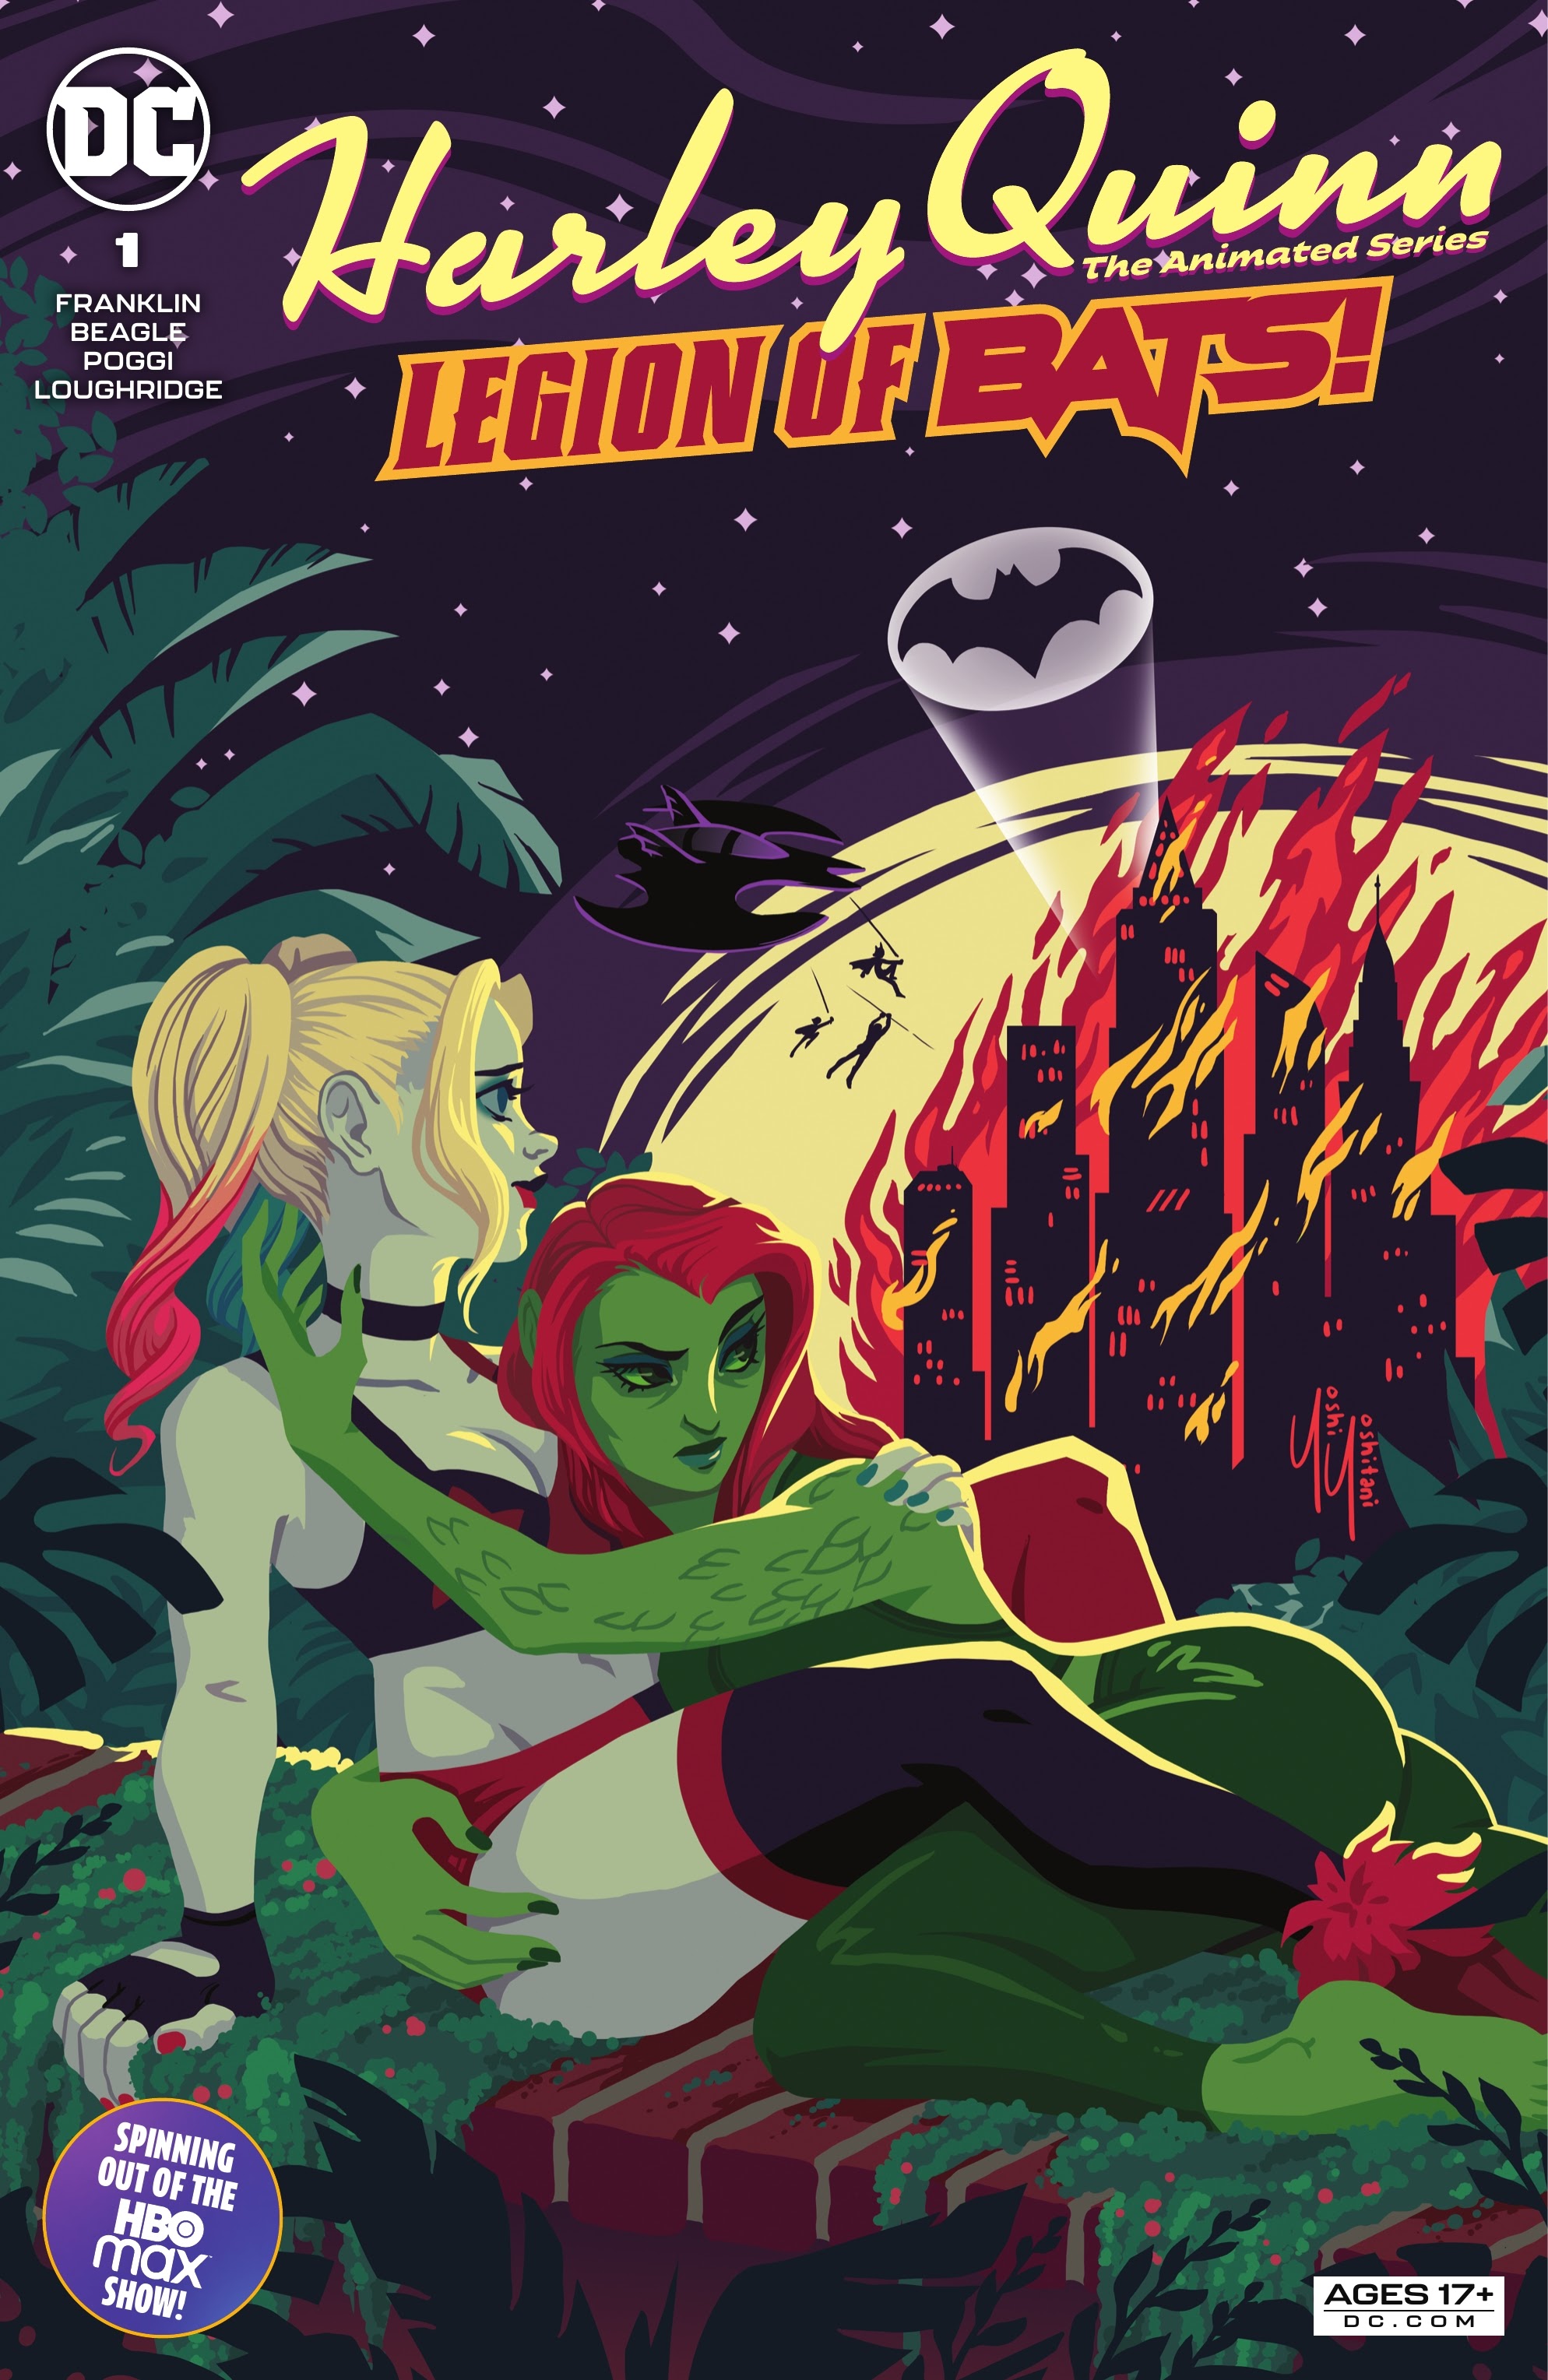 Read online Harley Quinn: The Animated Series: Legion of Bats! comic -  Issue #1 - 1